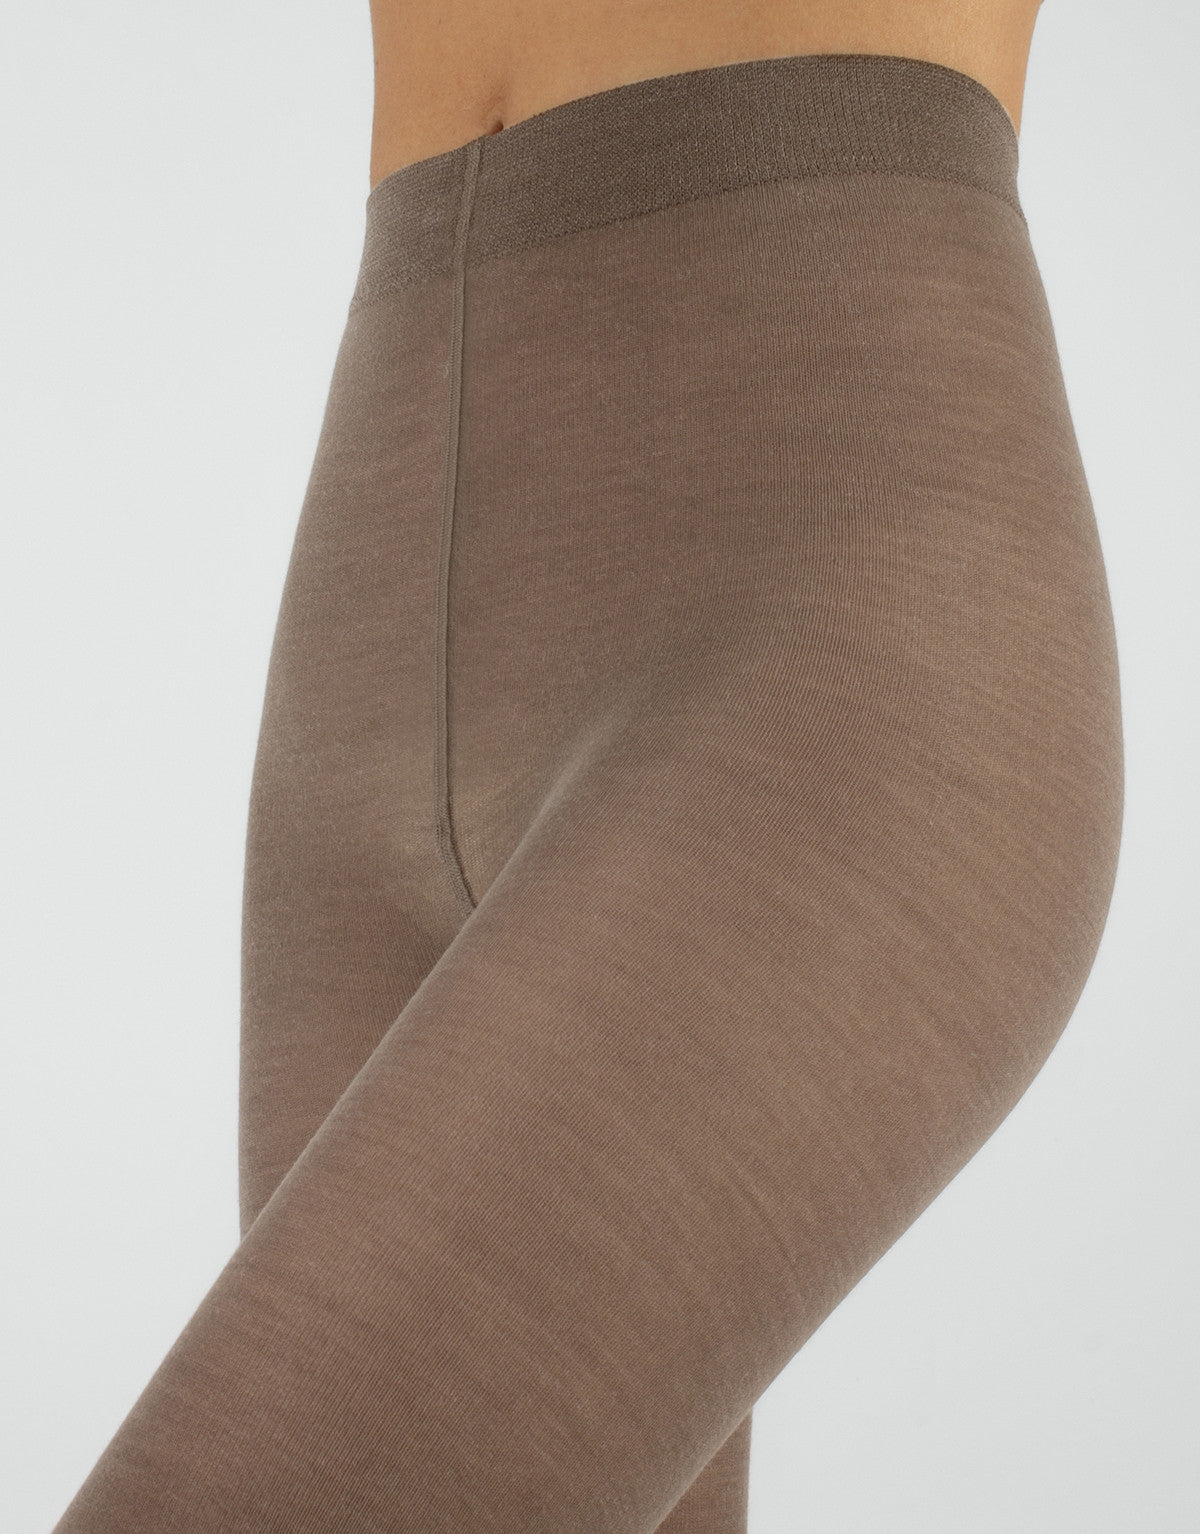 Calzitaly Beige Merino Tights - Light and warm knitted thermal tights with deep waistband and gusset, perfect for cold Winters.